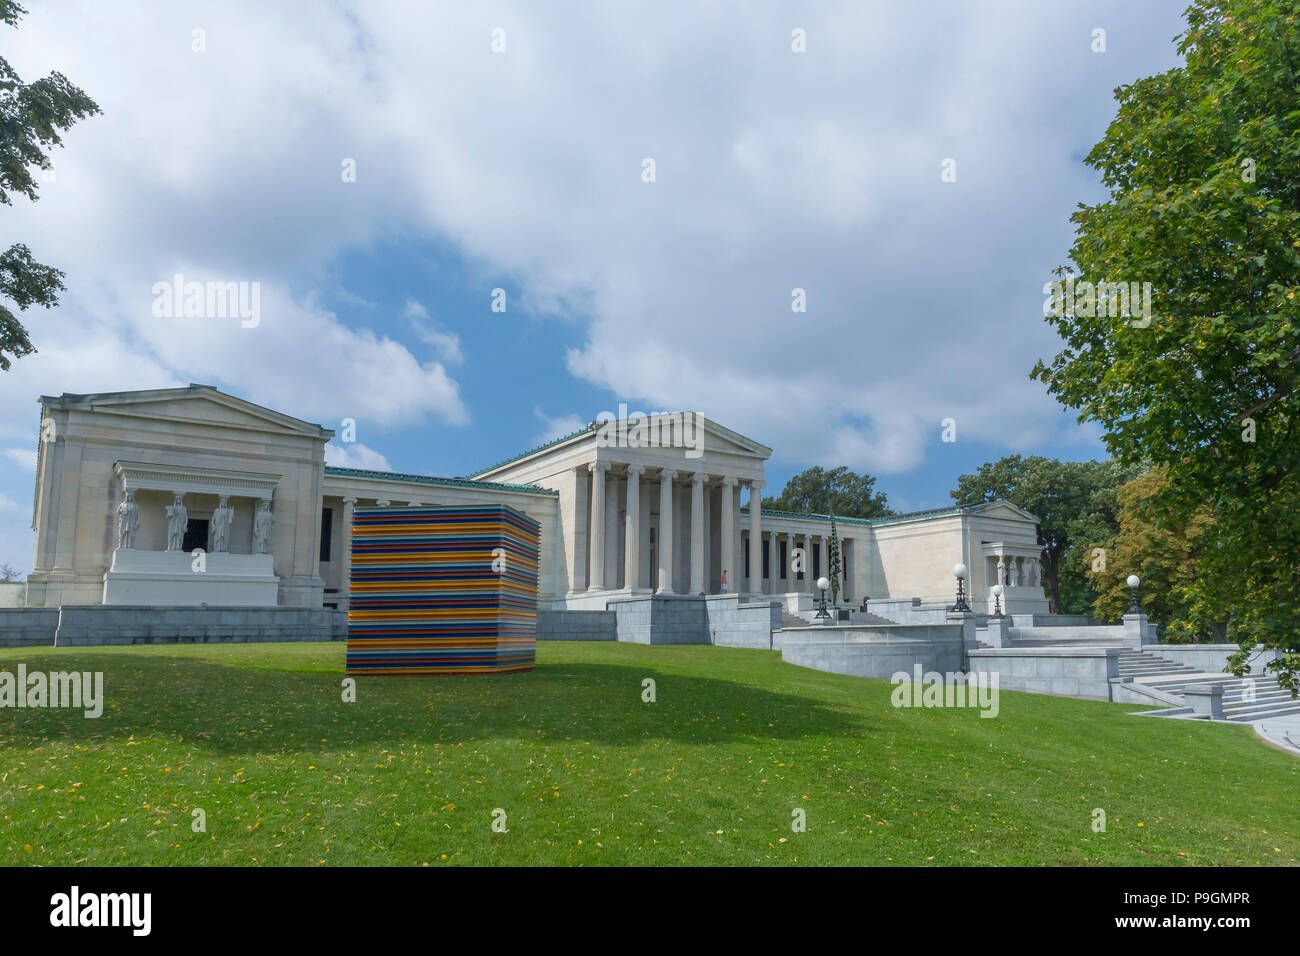 Exterior of Albright-Knox Art Gallery with Stacked Revision Structure, Liam Gillick, 2005, Buffalo, New York, USA, North America Stock Photo